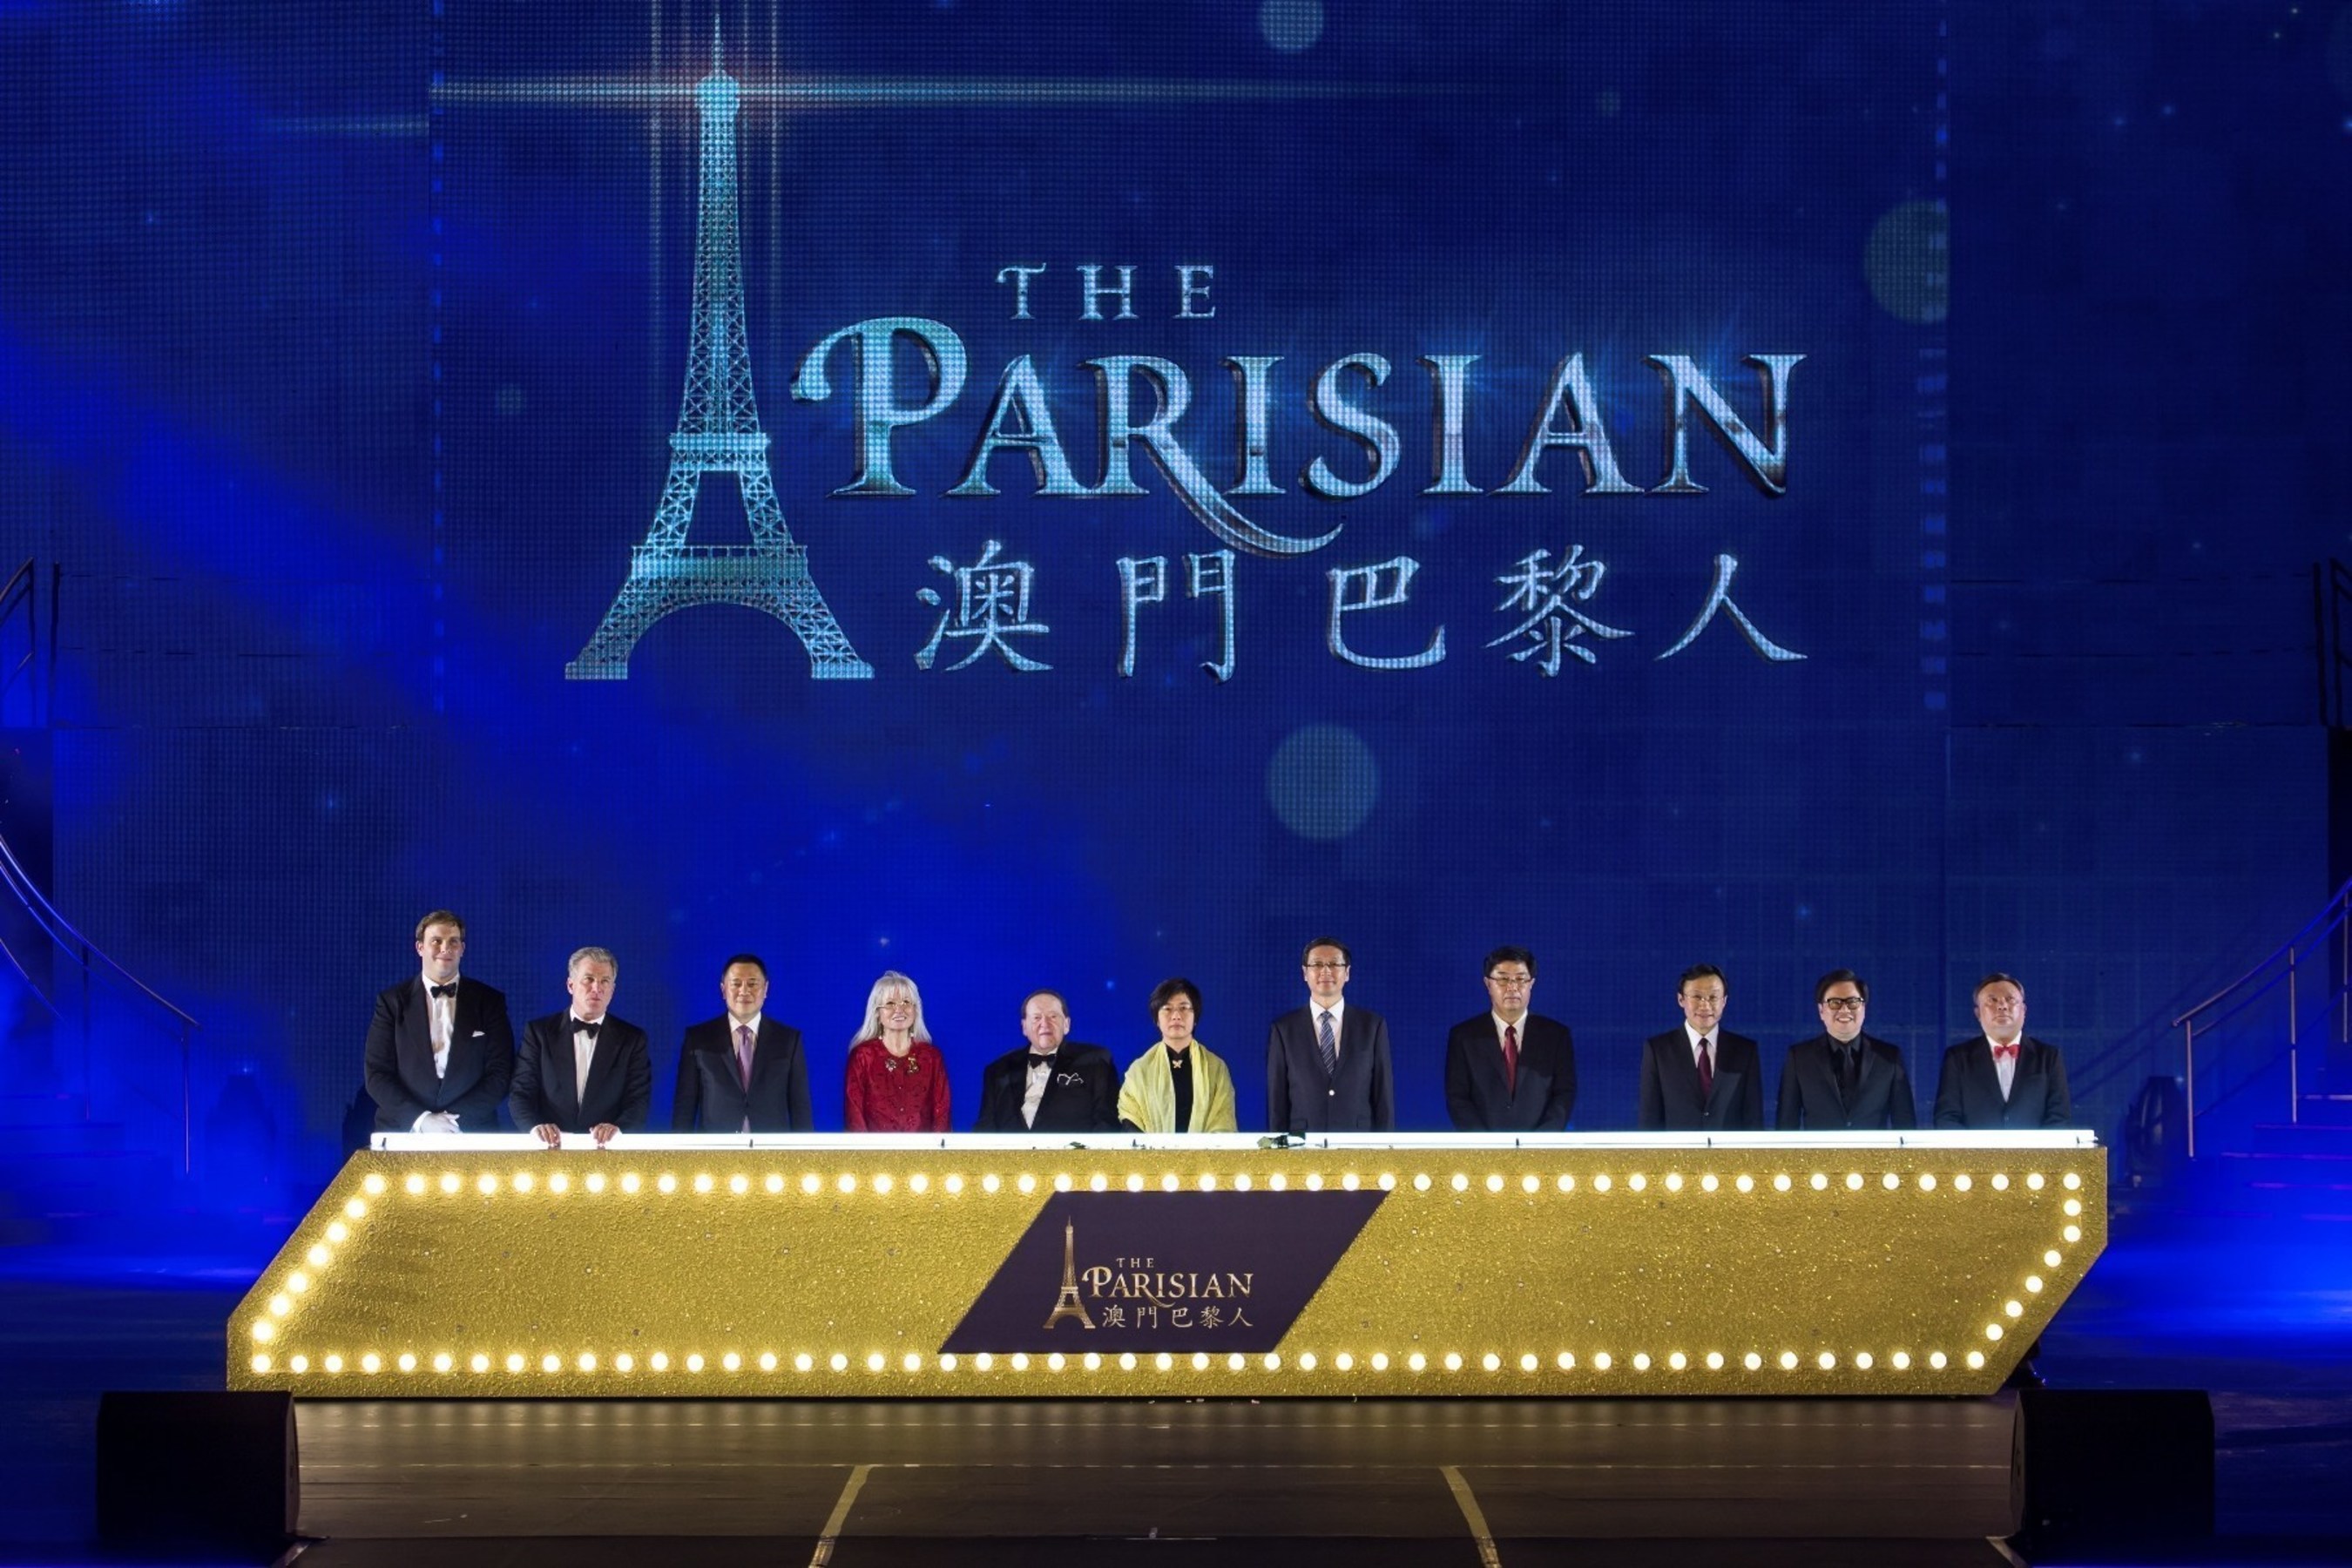 Guests of honor, including Las Vegas Sands and Sands China executives, and Macao government officials, officiate the grand opening of The Parisian Macao Tuesday.